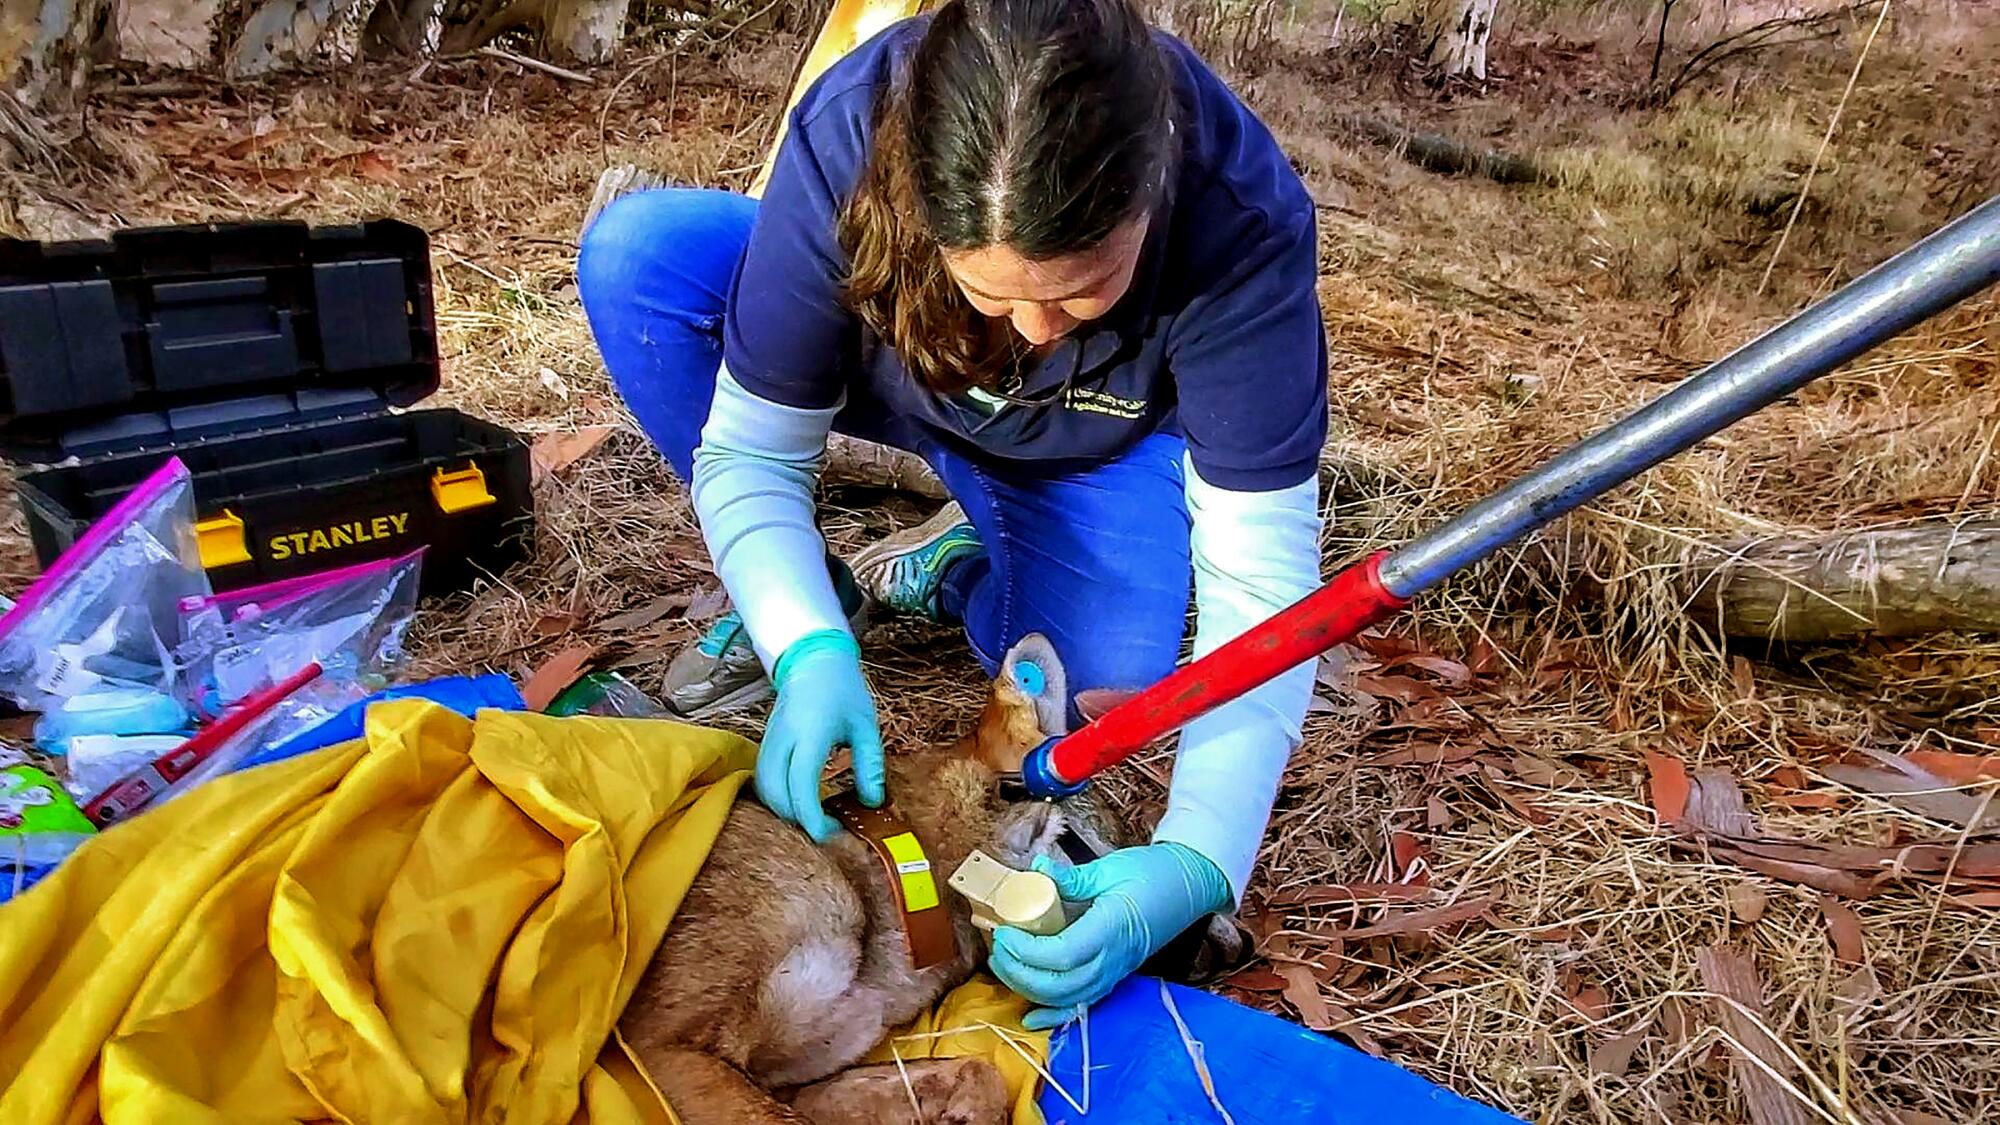 A woman attaches a collar to a prone coyote